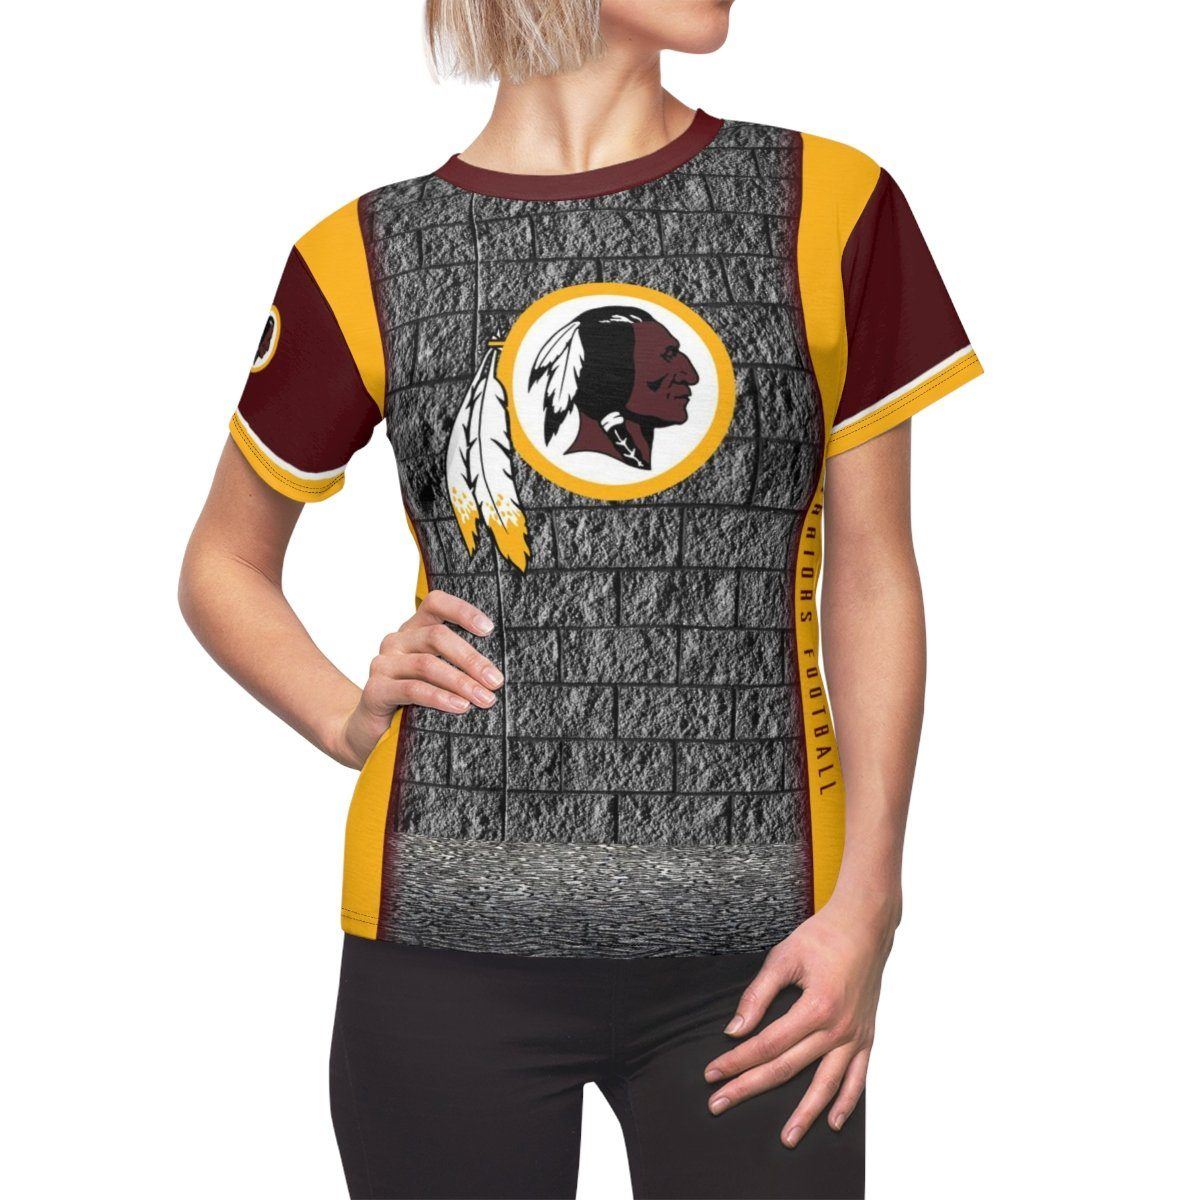 Dungeon - V.2 - Extreme Sportswear Women's Cut & Sew Template-Photoshop Template - Photo Solutions